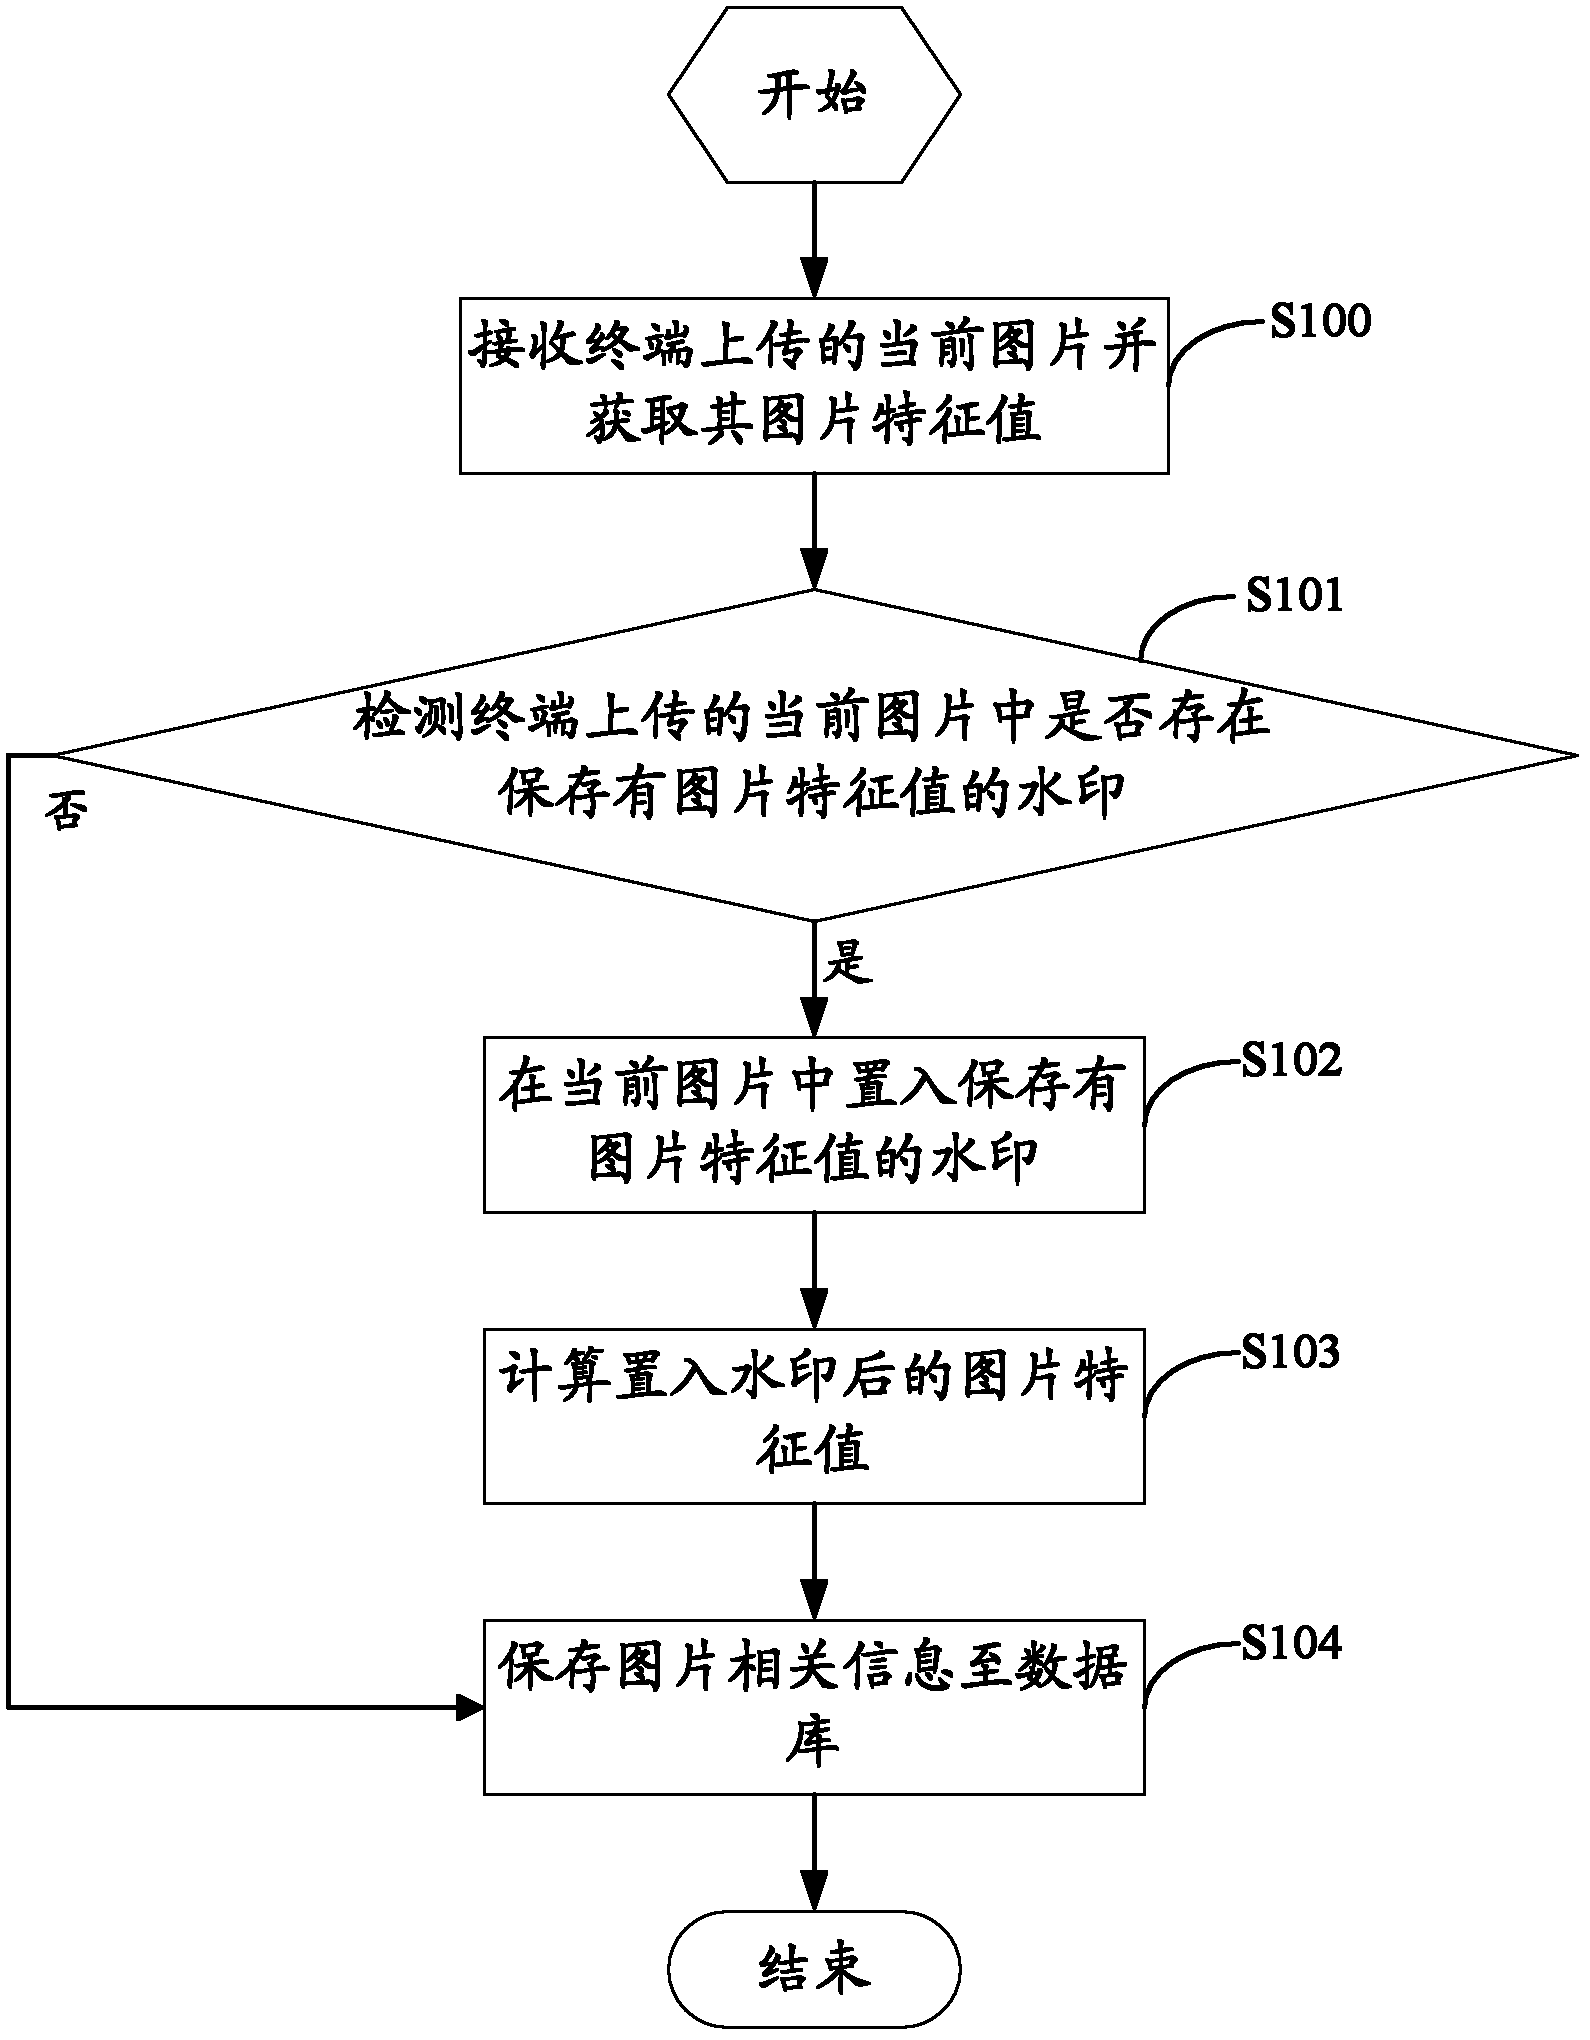 Method and system for tracing homologous image through watermark